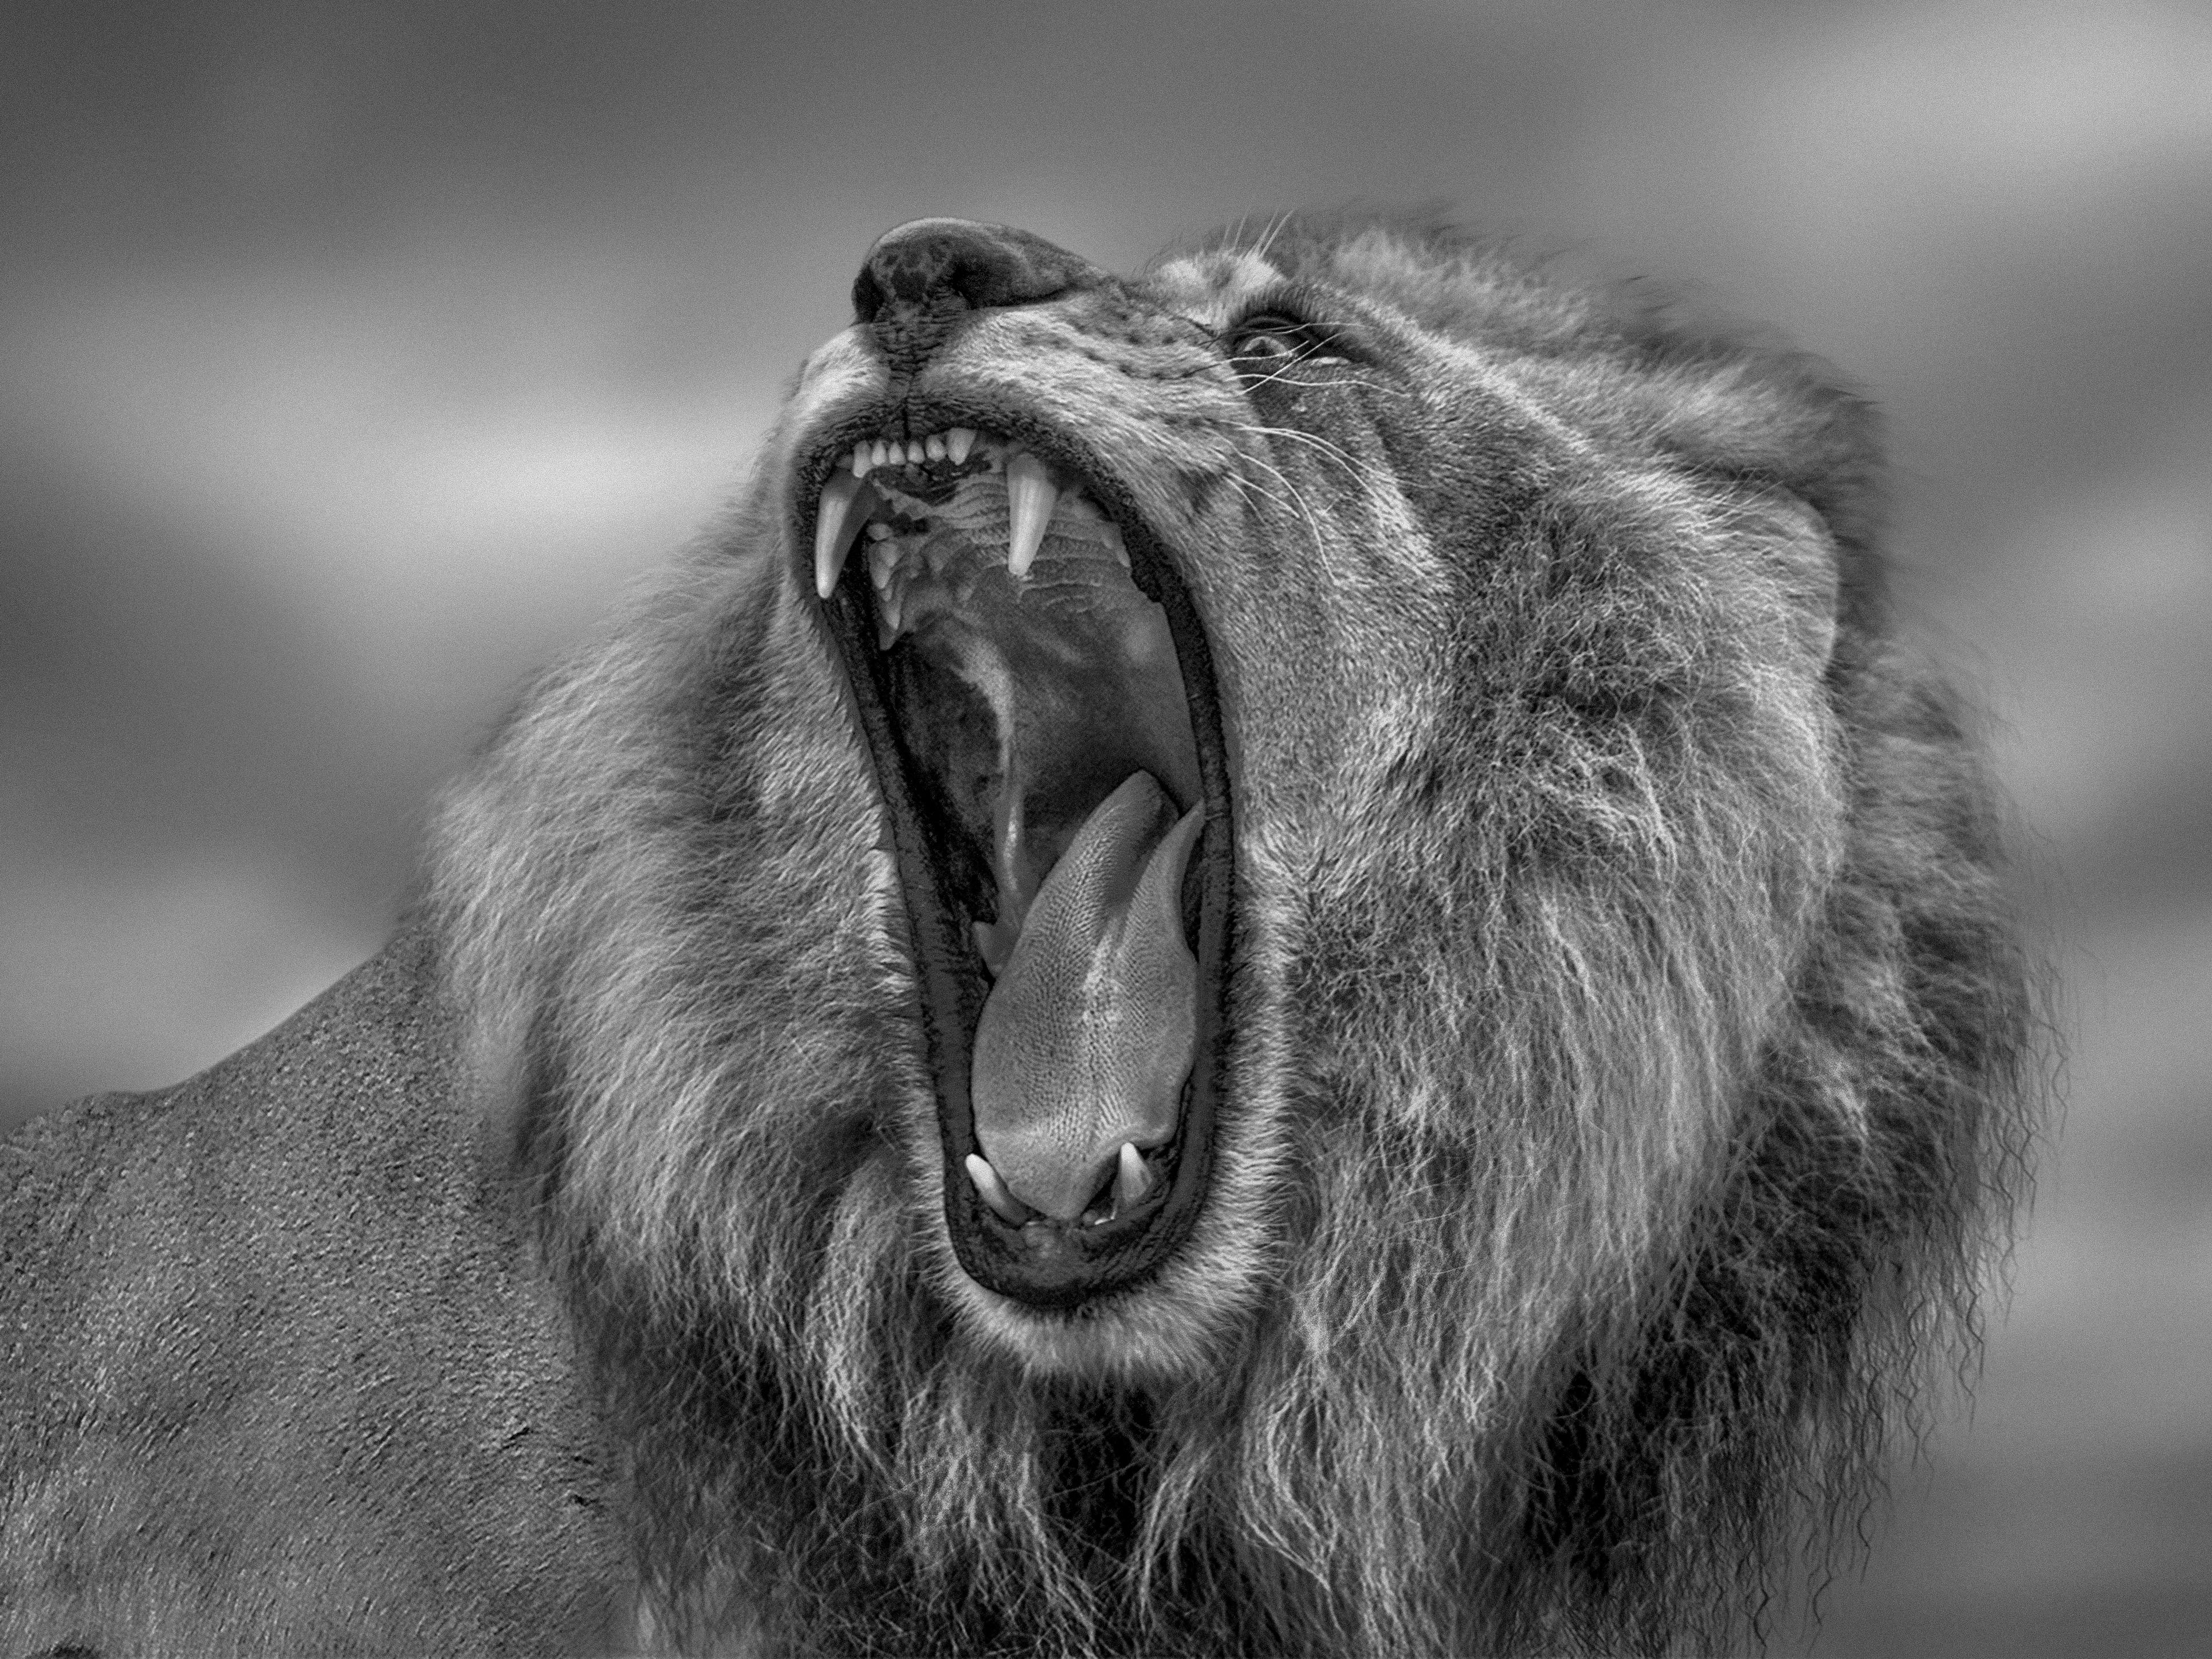 Shane Russeck Animal Print - "Roar" - 40x60 Black and White Lion Photography  Africa African Lion Photograph